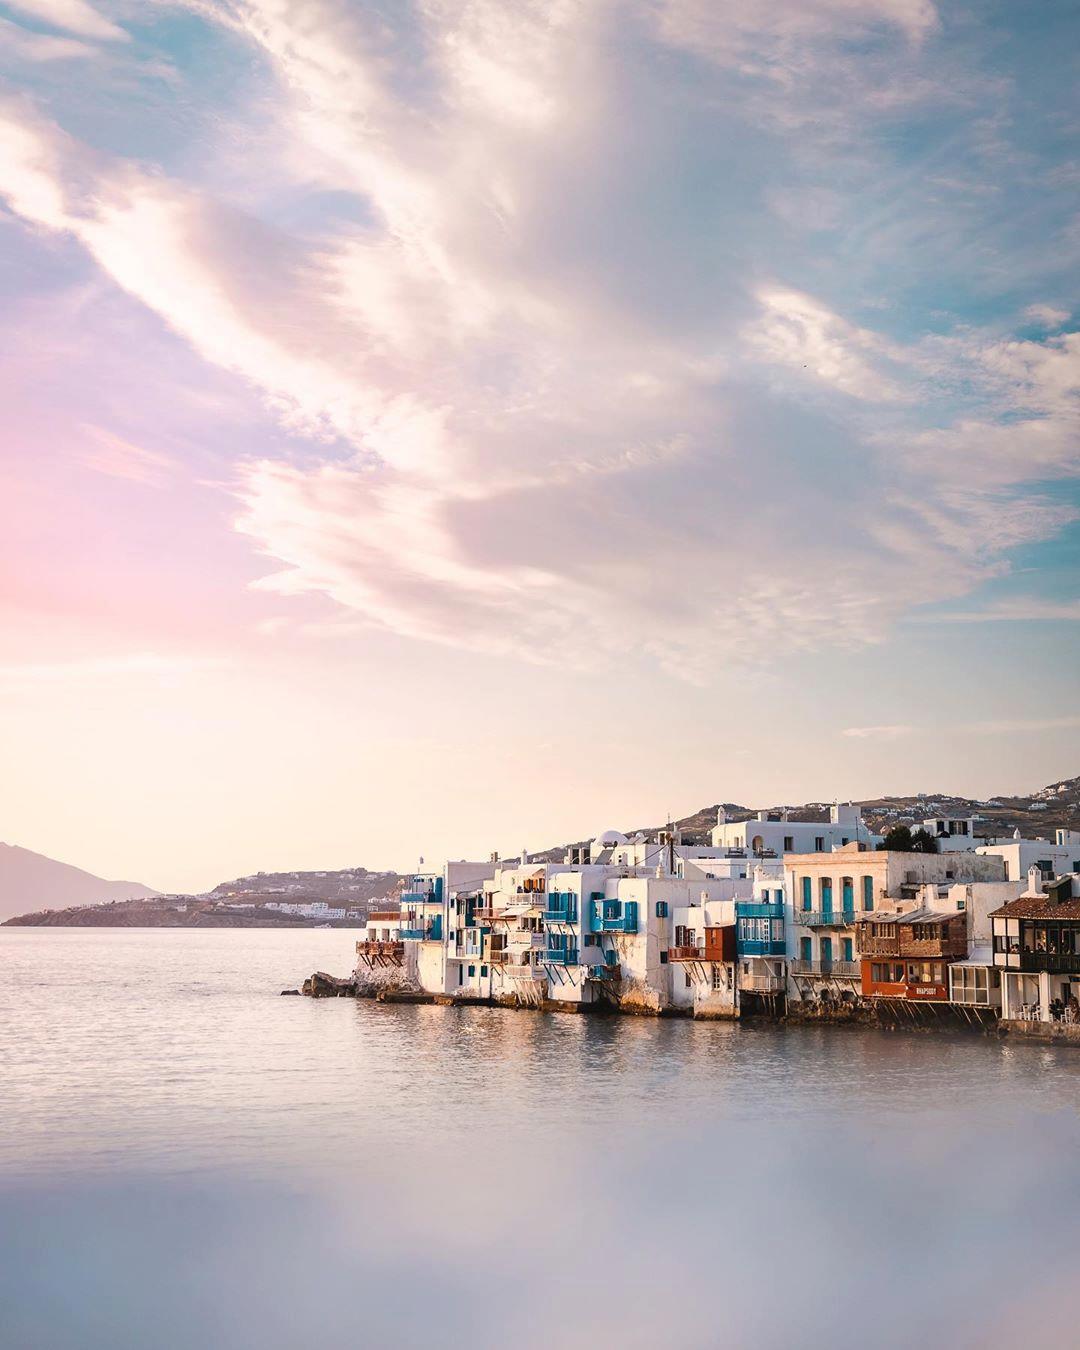 A dreamy sky in Mykonos to inspire your #WFH Tuesday.  #PerfectingTheJourney